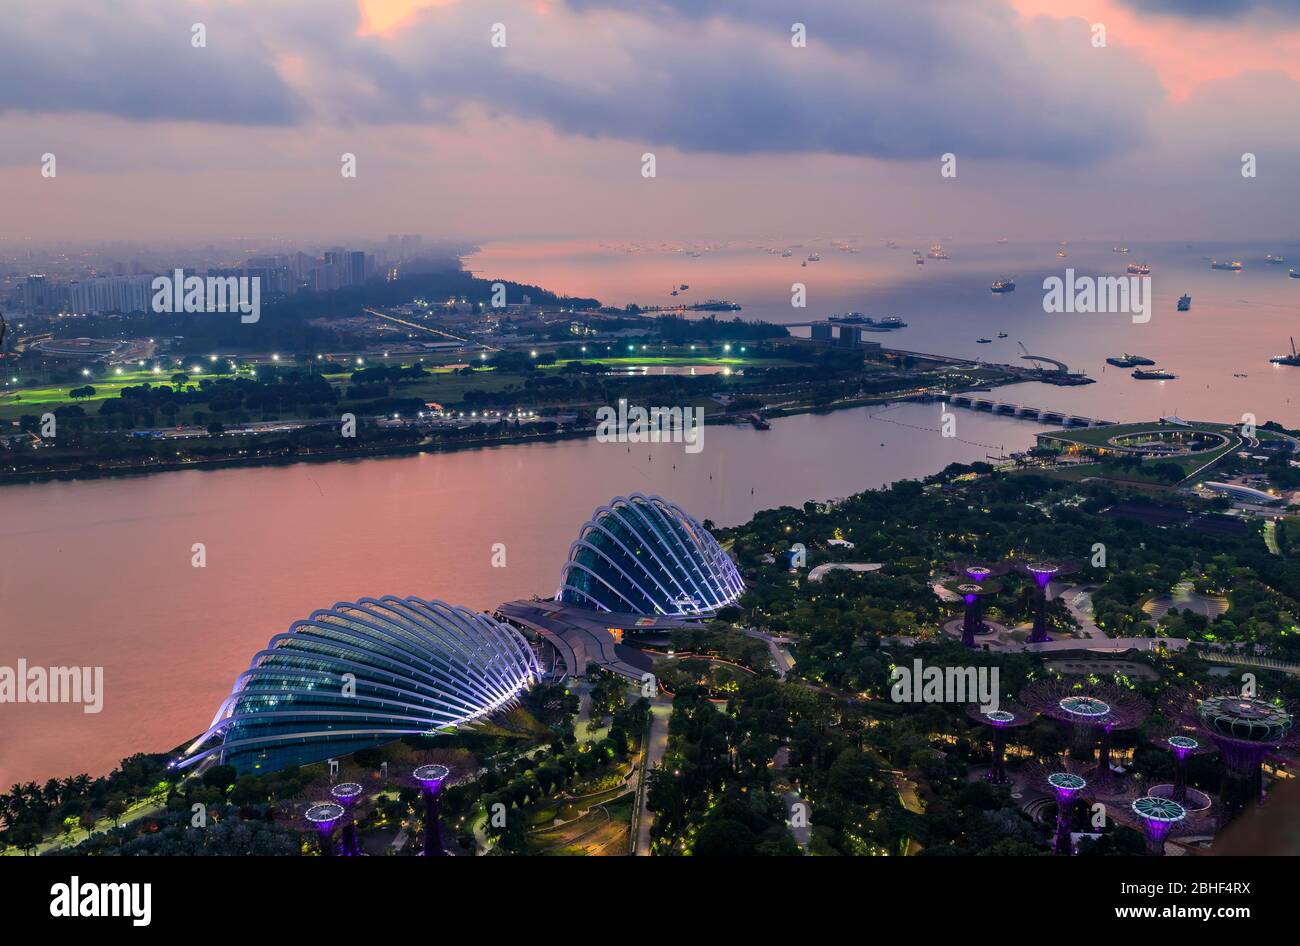 Aerial view of Cloud Forest, the Flower Dome, and the Supertree Grove in Gardens by the Bay, Singapore at sunrise Stock Photo